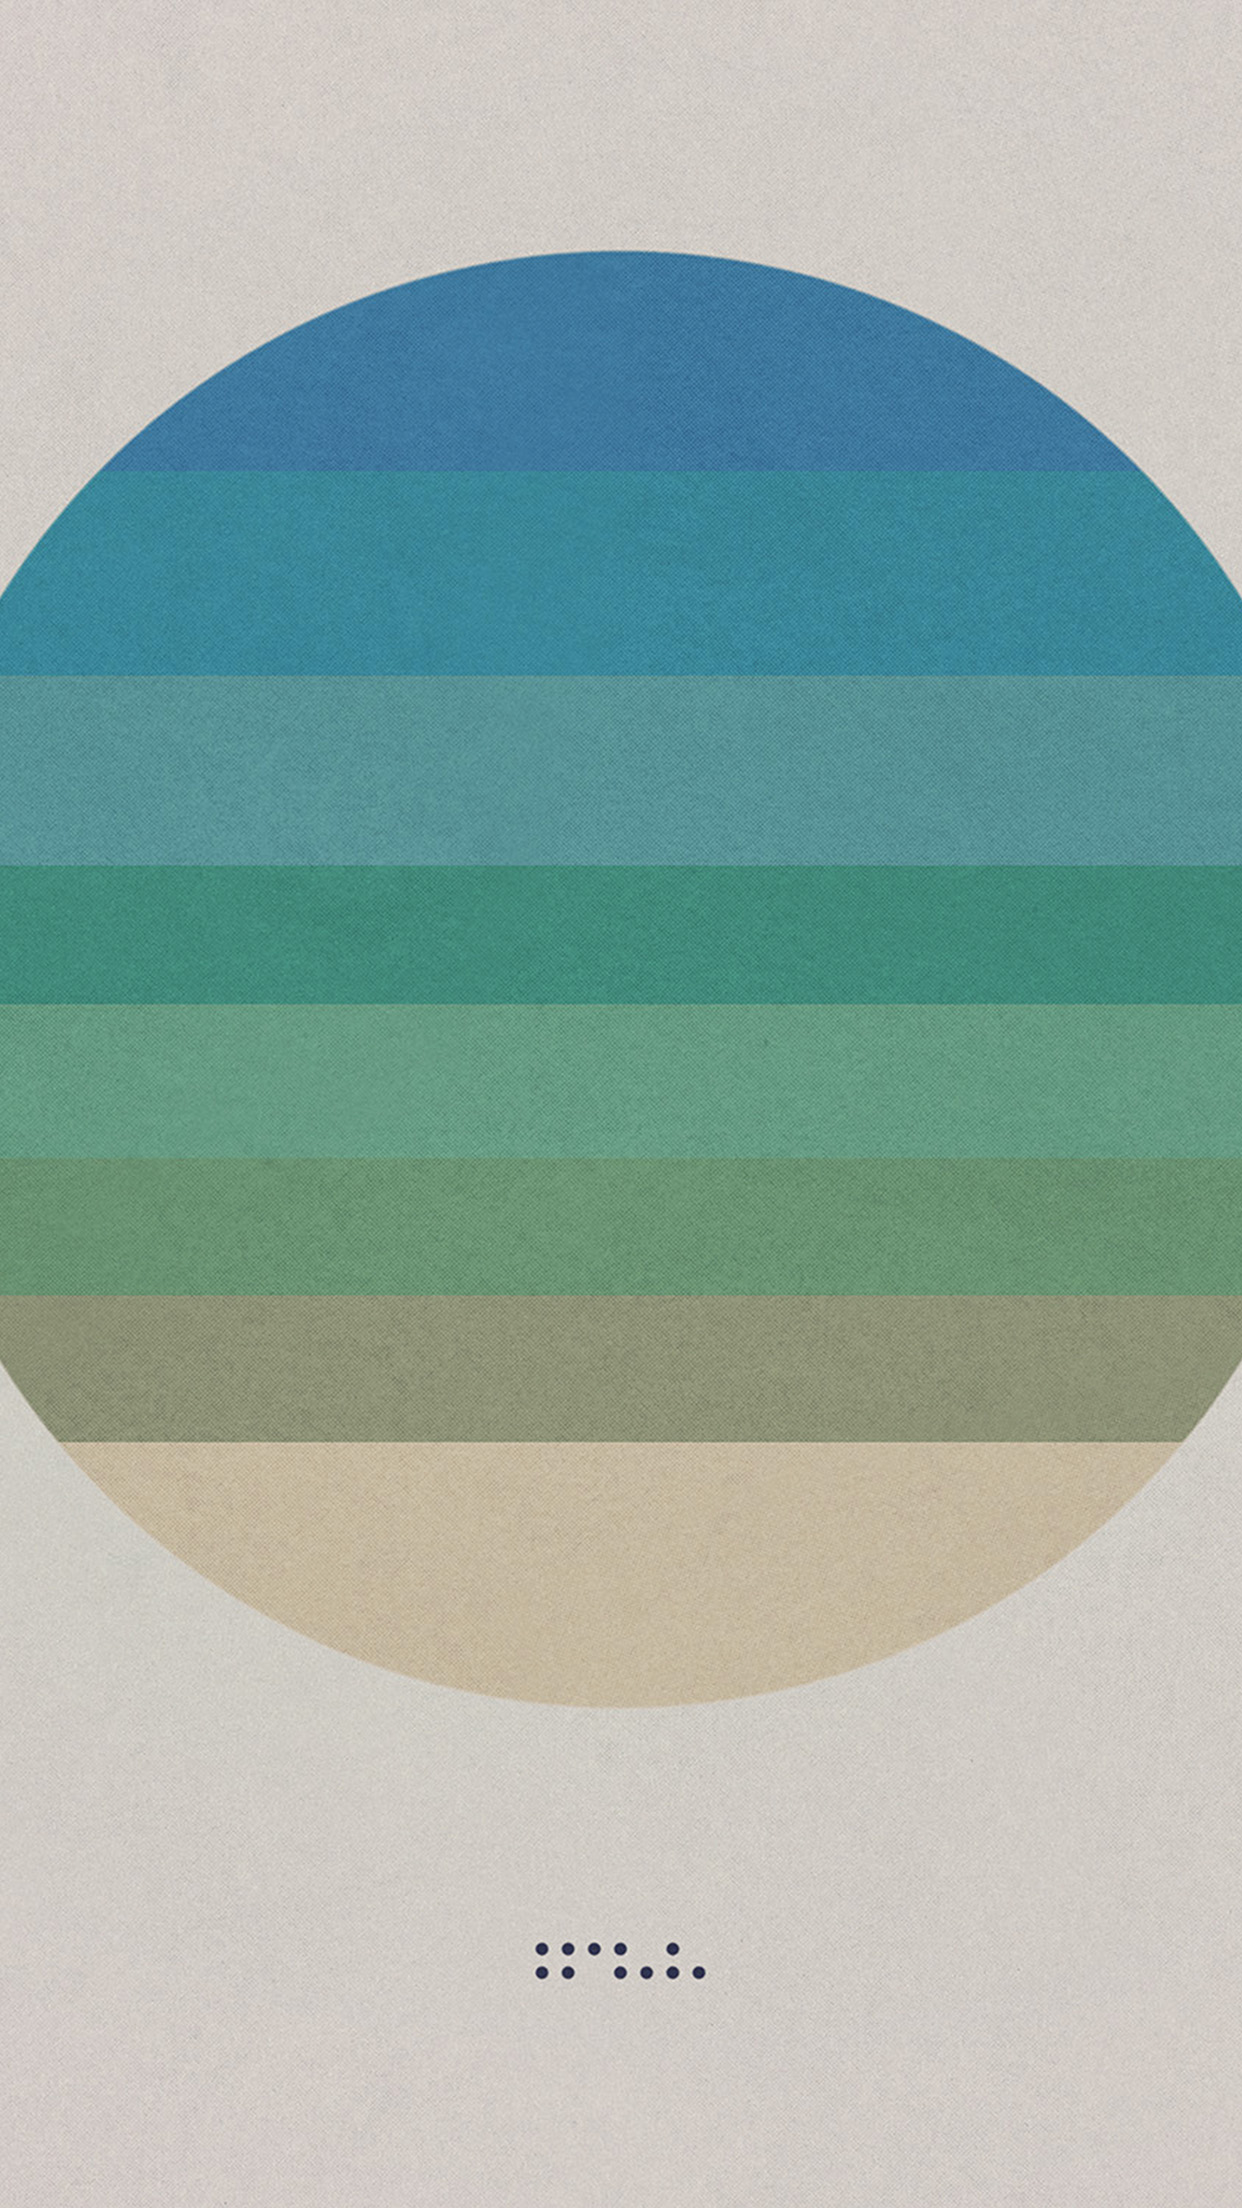 Tycho Art Music Album Cover Illust Simple White Android wallpaper